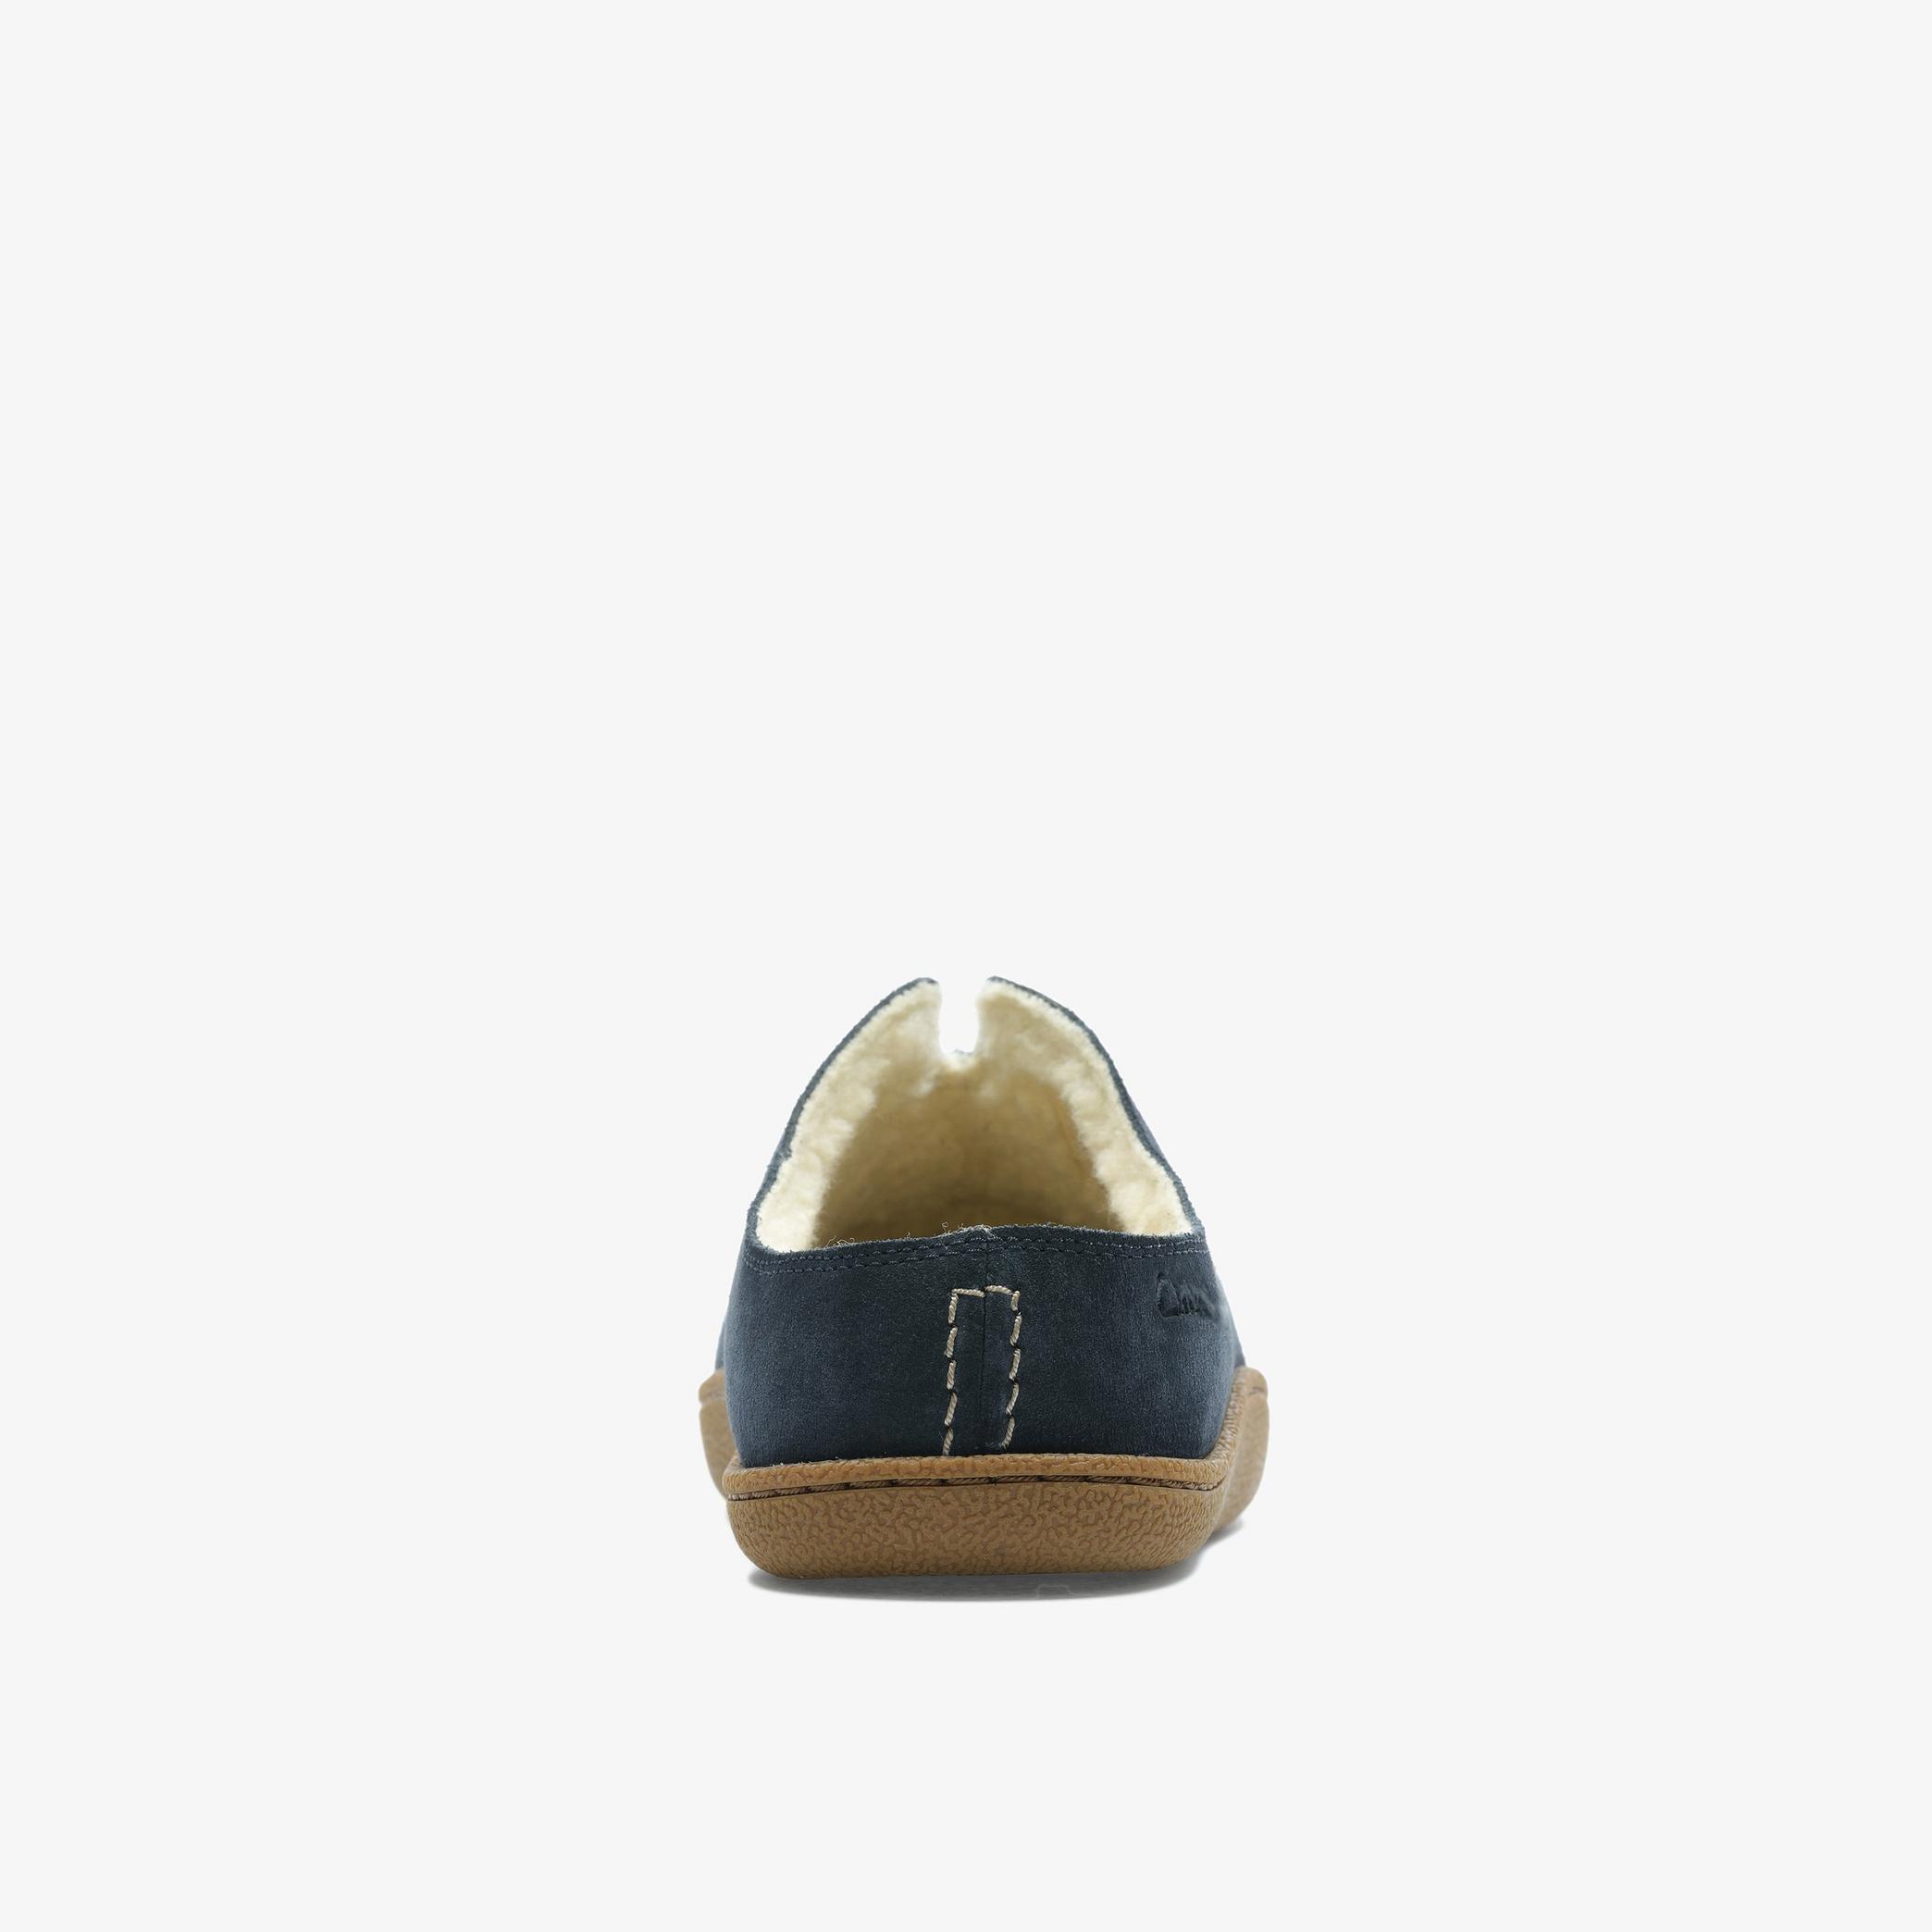 Home Mule Navy Suede Slippers, view 5 of 6